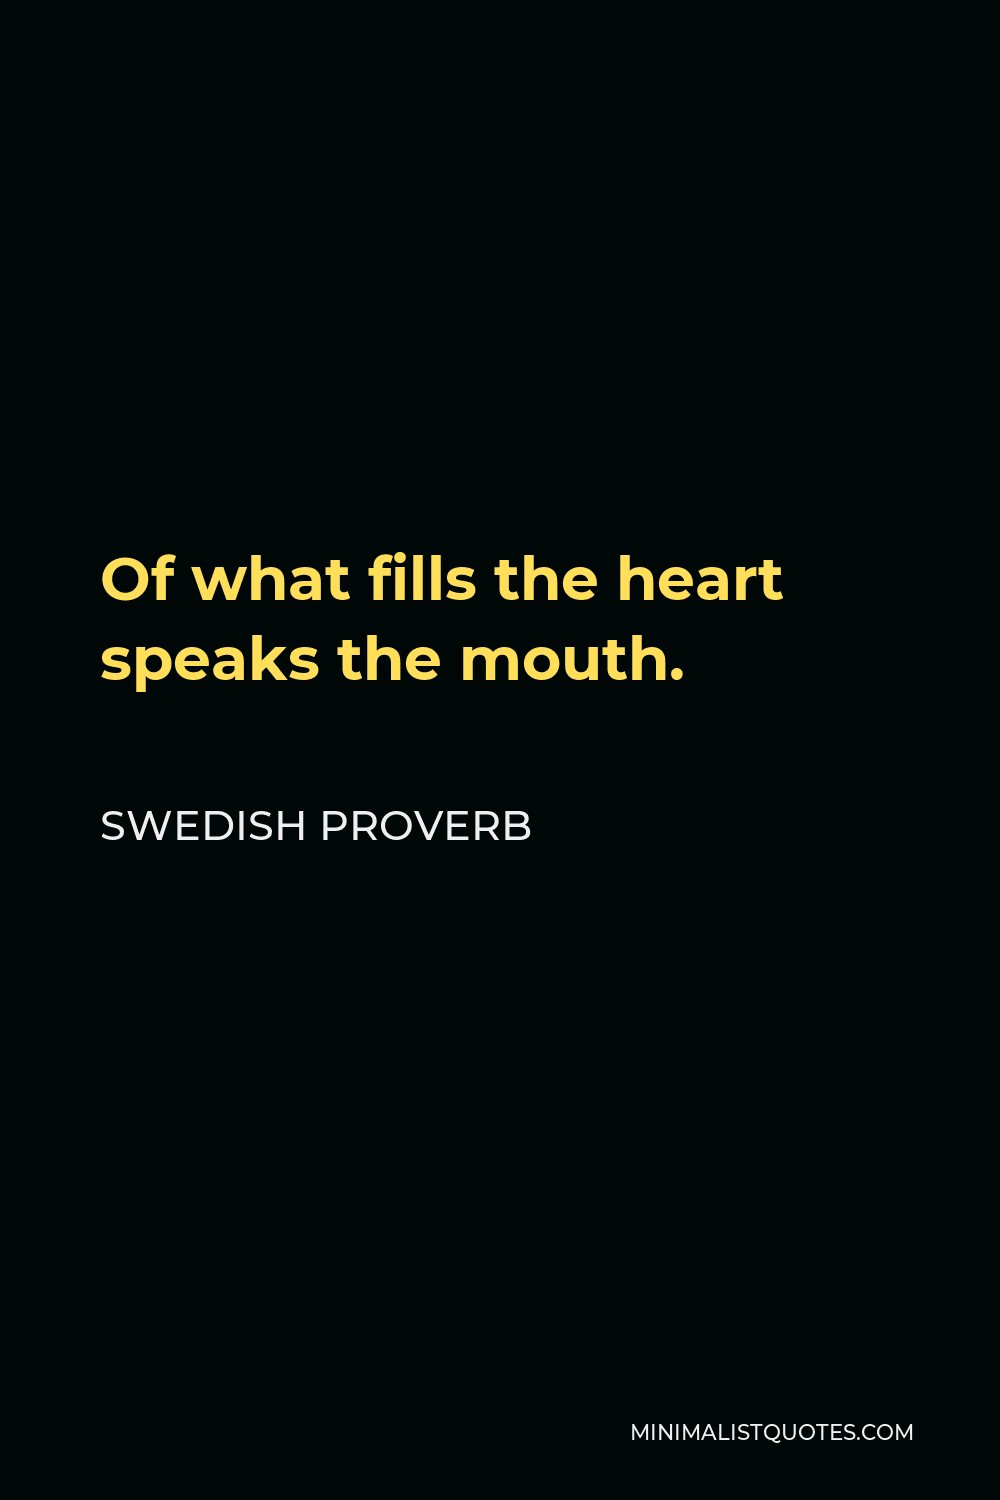 Swedish Proverb Quote - Of what fills the heart speaks the mouth.